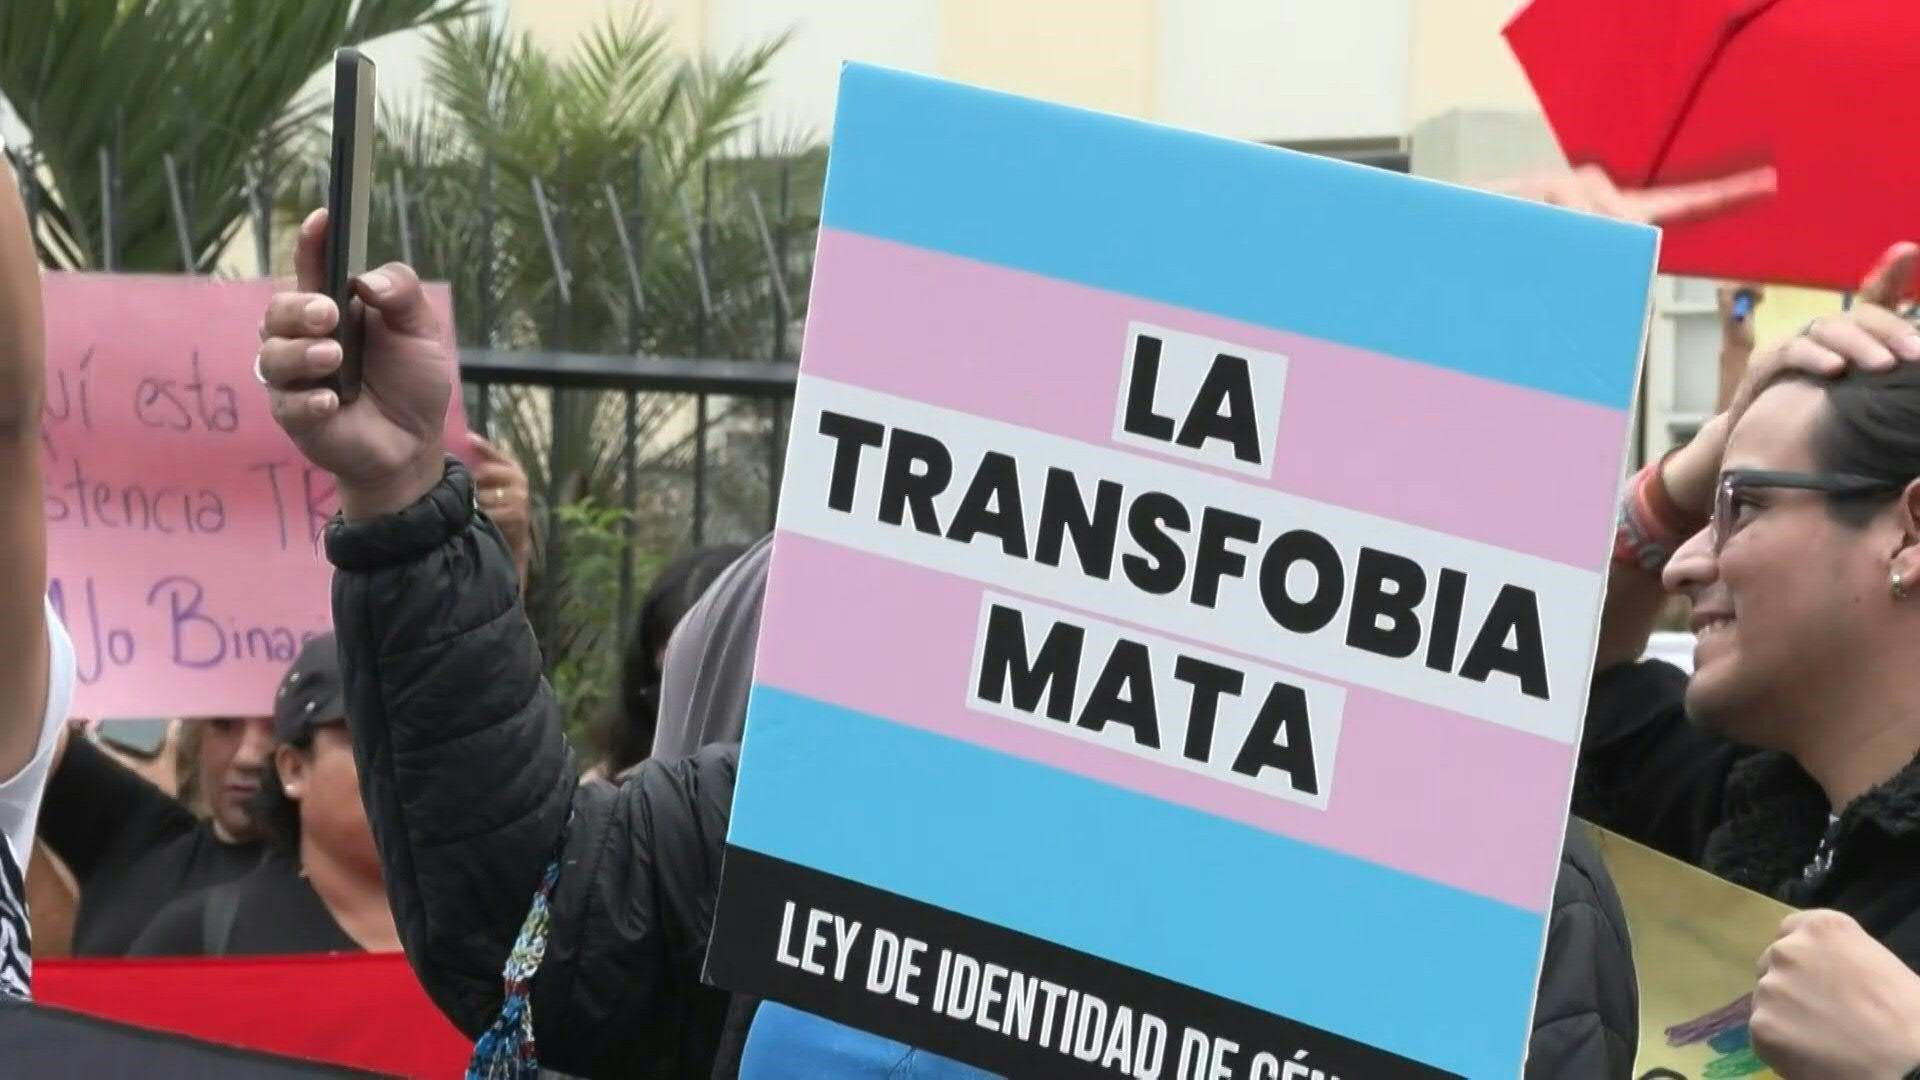 LGBTIQ+ activists march against decree describing transsexuality as 'mental disorder'